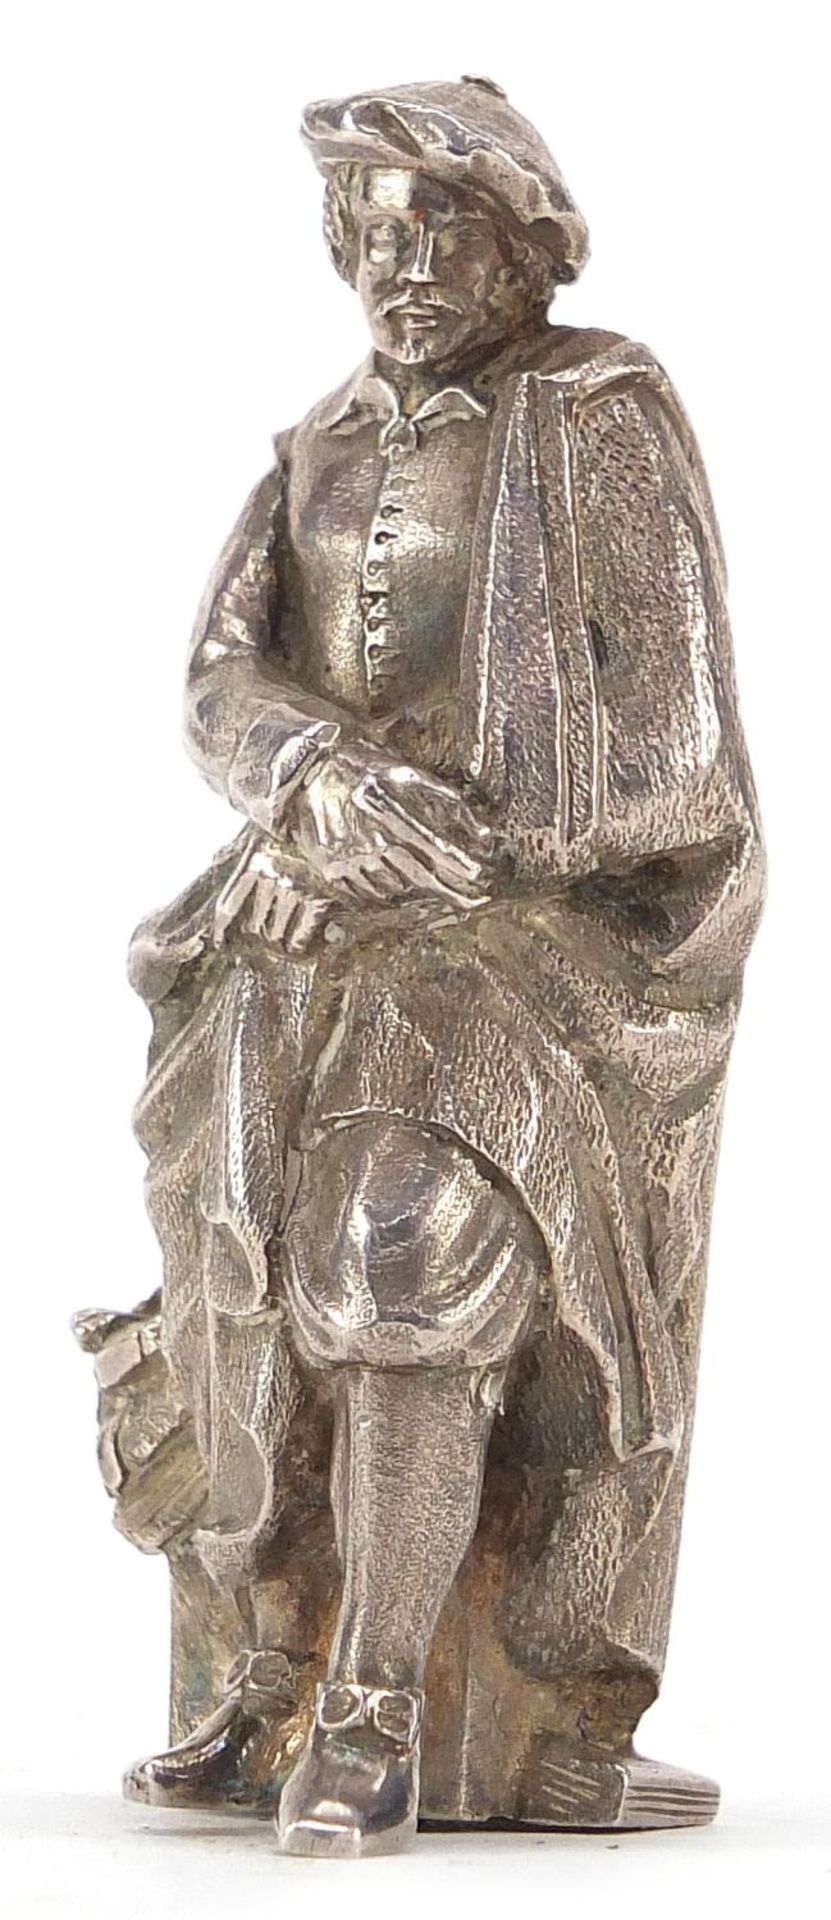 Dutch silver figure of Rembrandt, 6cm high, 68.0g : For Further Condition Reports Please Visit Our